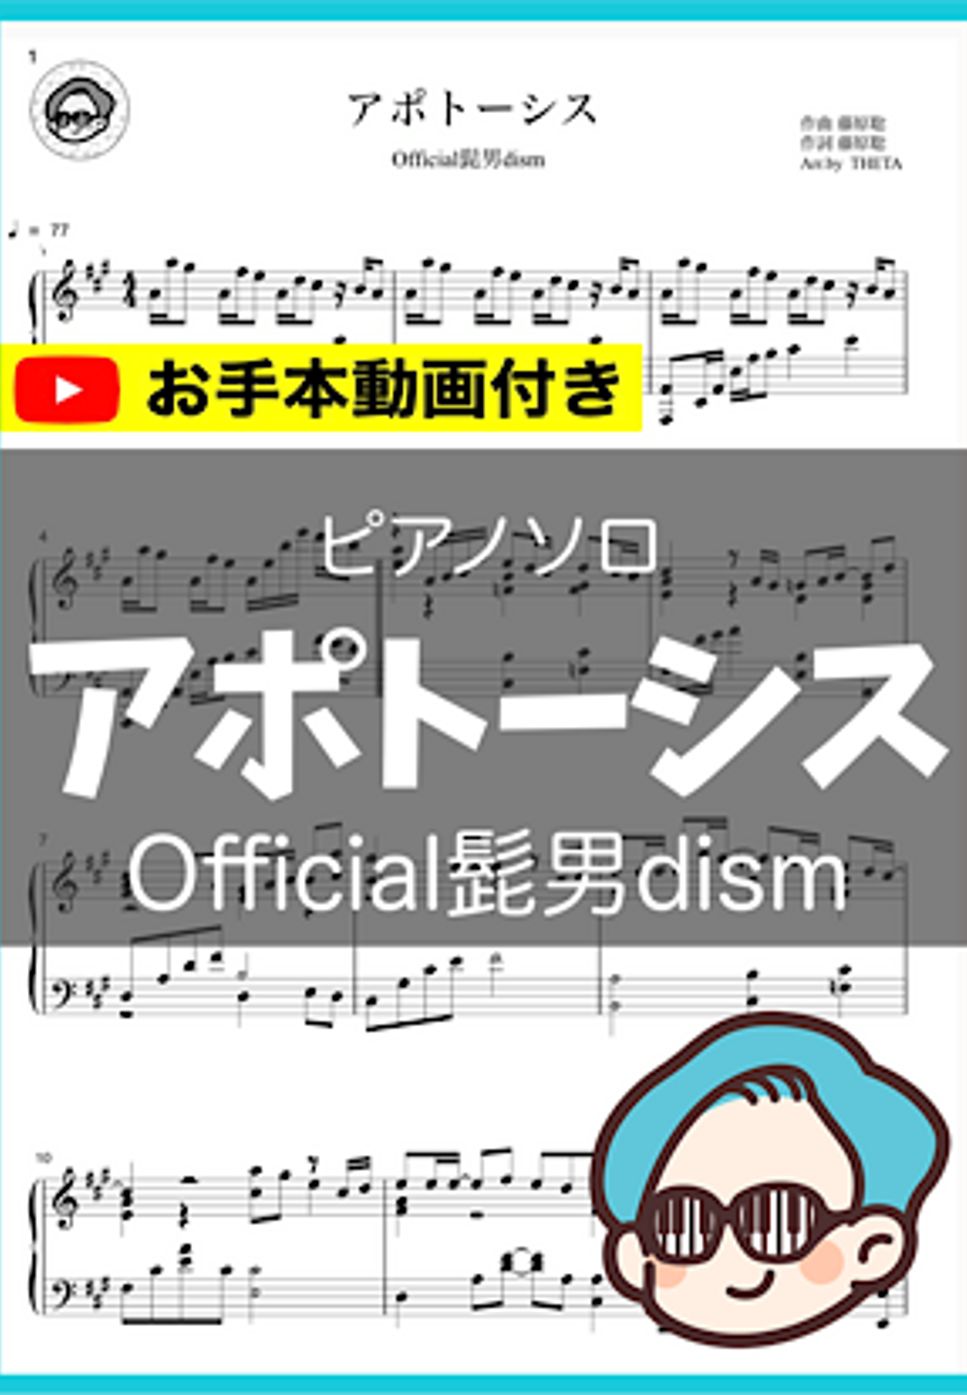 Official髭男dism - アポトーシス by シータピアノ